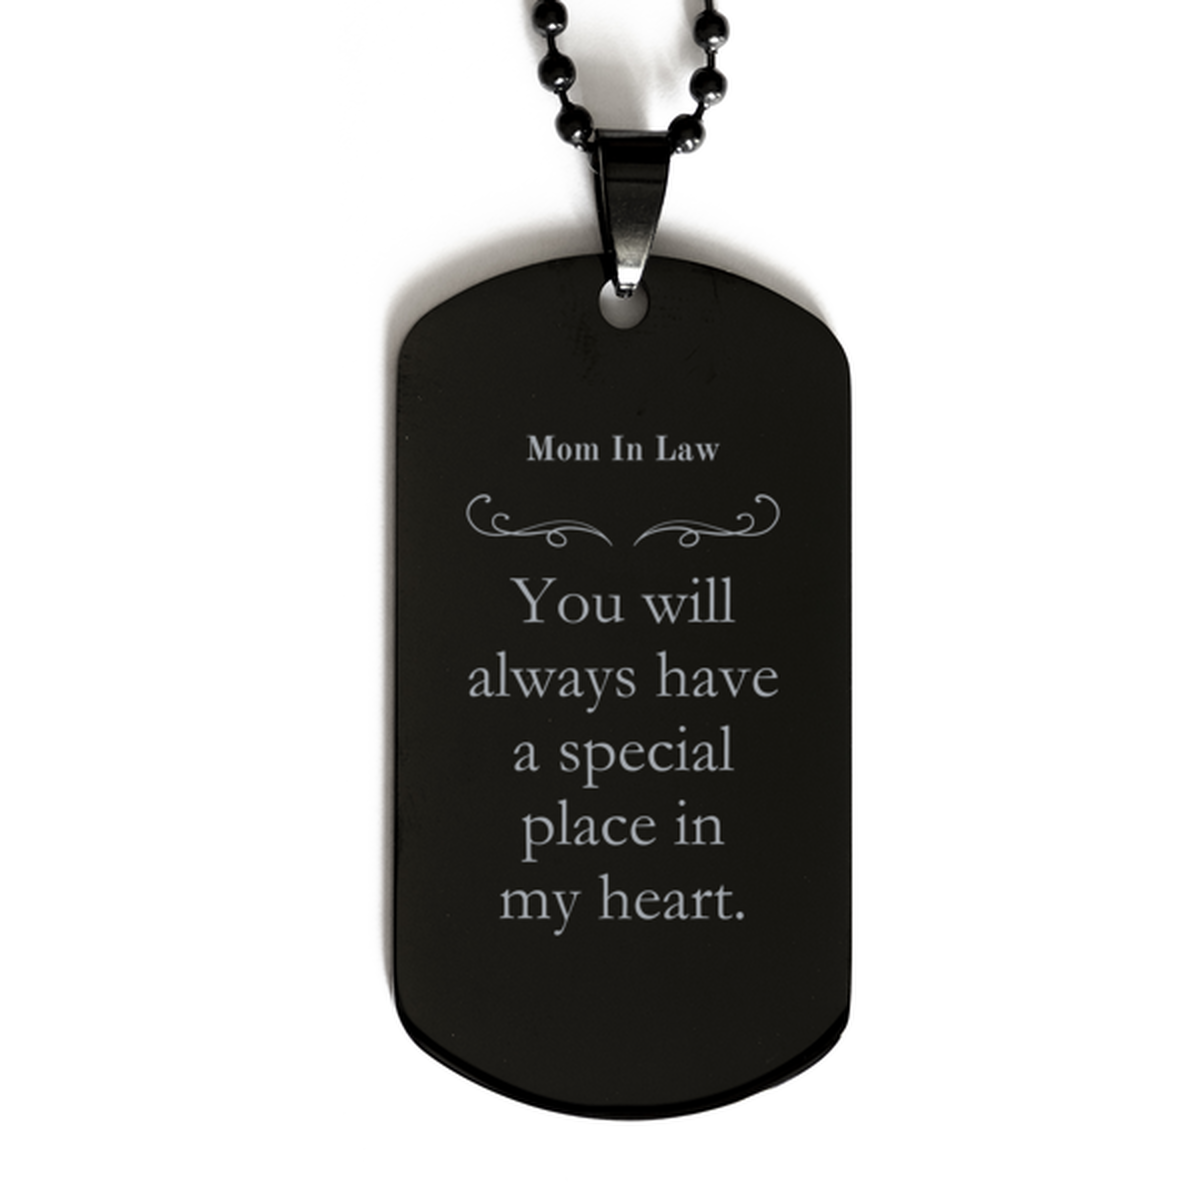 Black Dog Tag for Mom In Law - Engraved Quote, Perfect Gift for Her Birthday, Mothers Day, Christmas, Veterans Day, and More - Youll Always Have a Special Place in My Heart